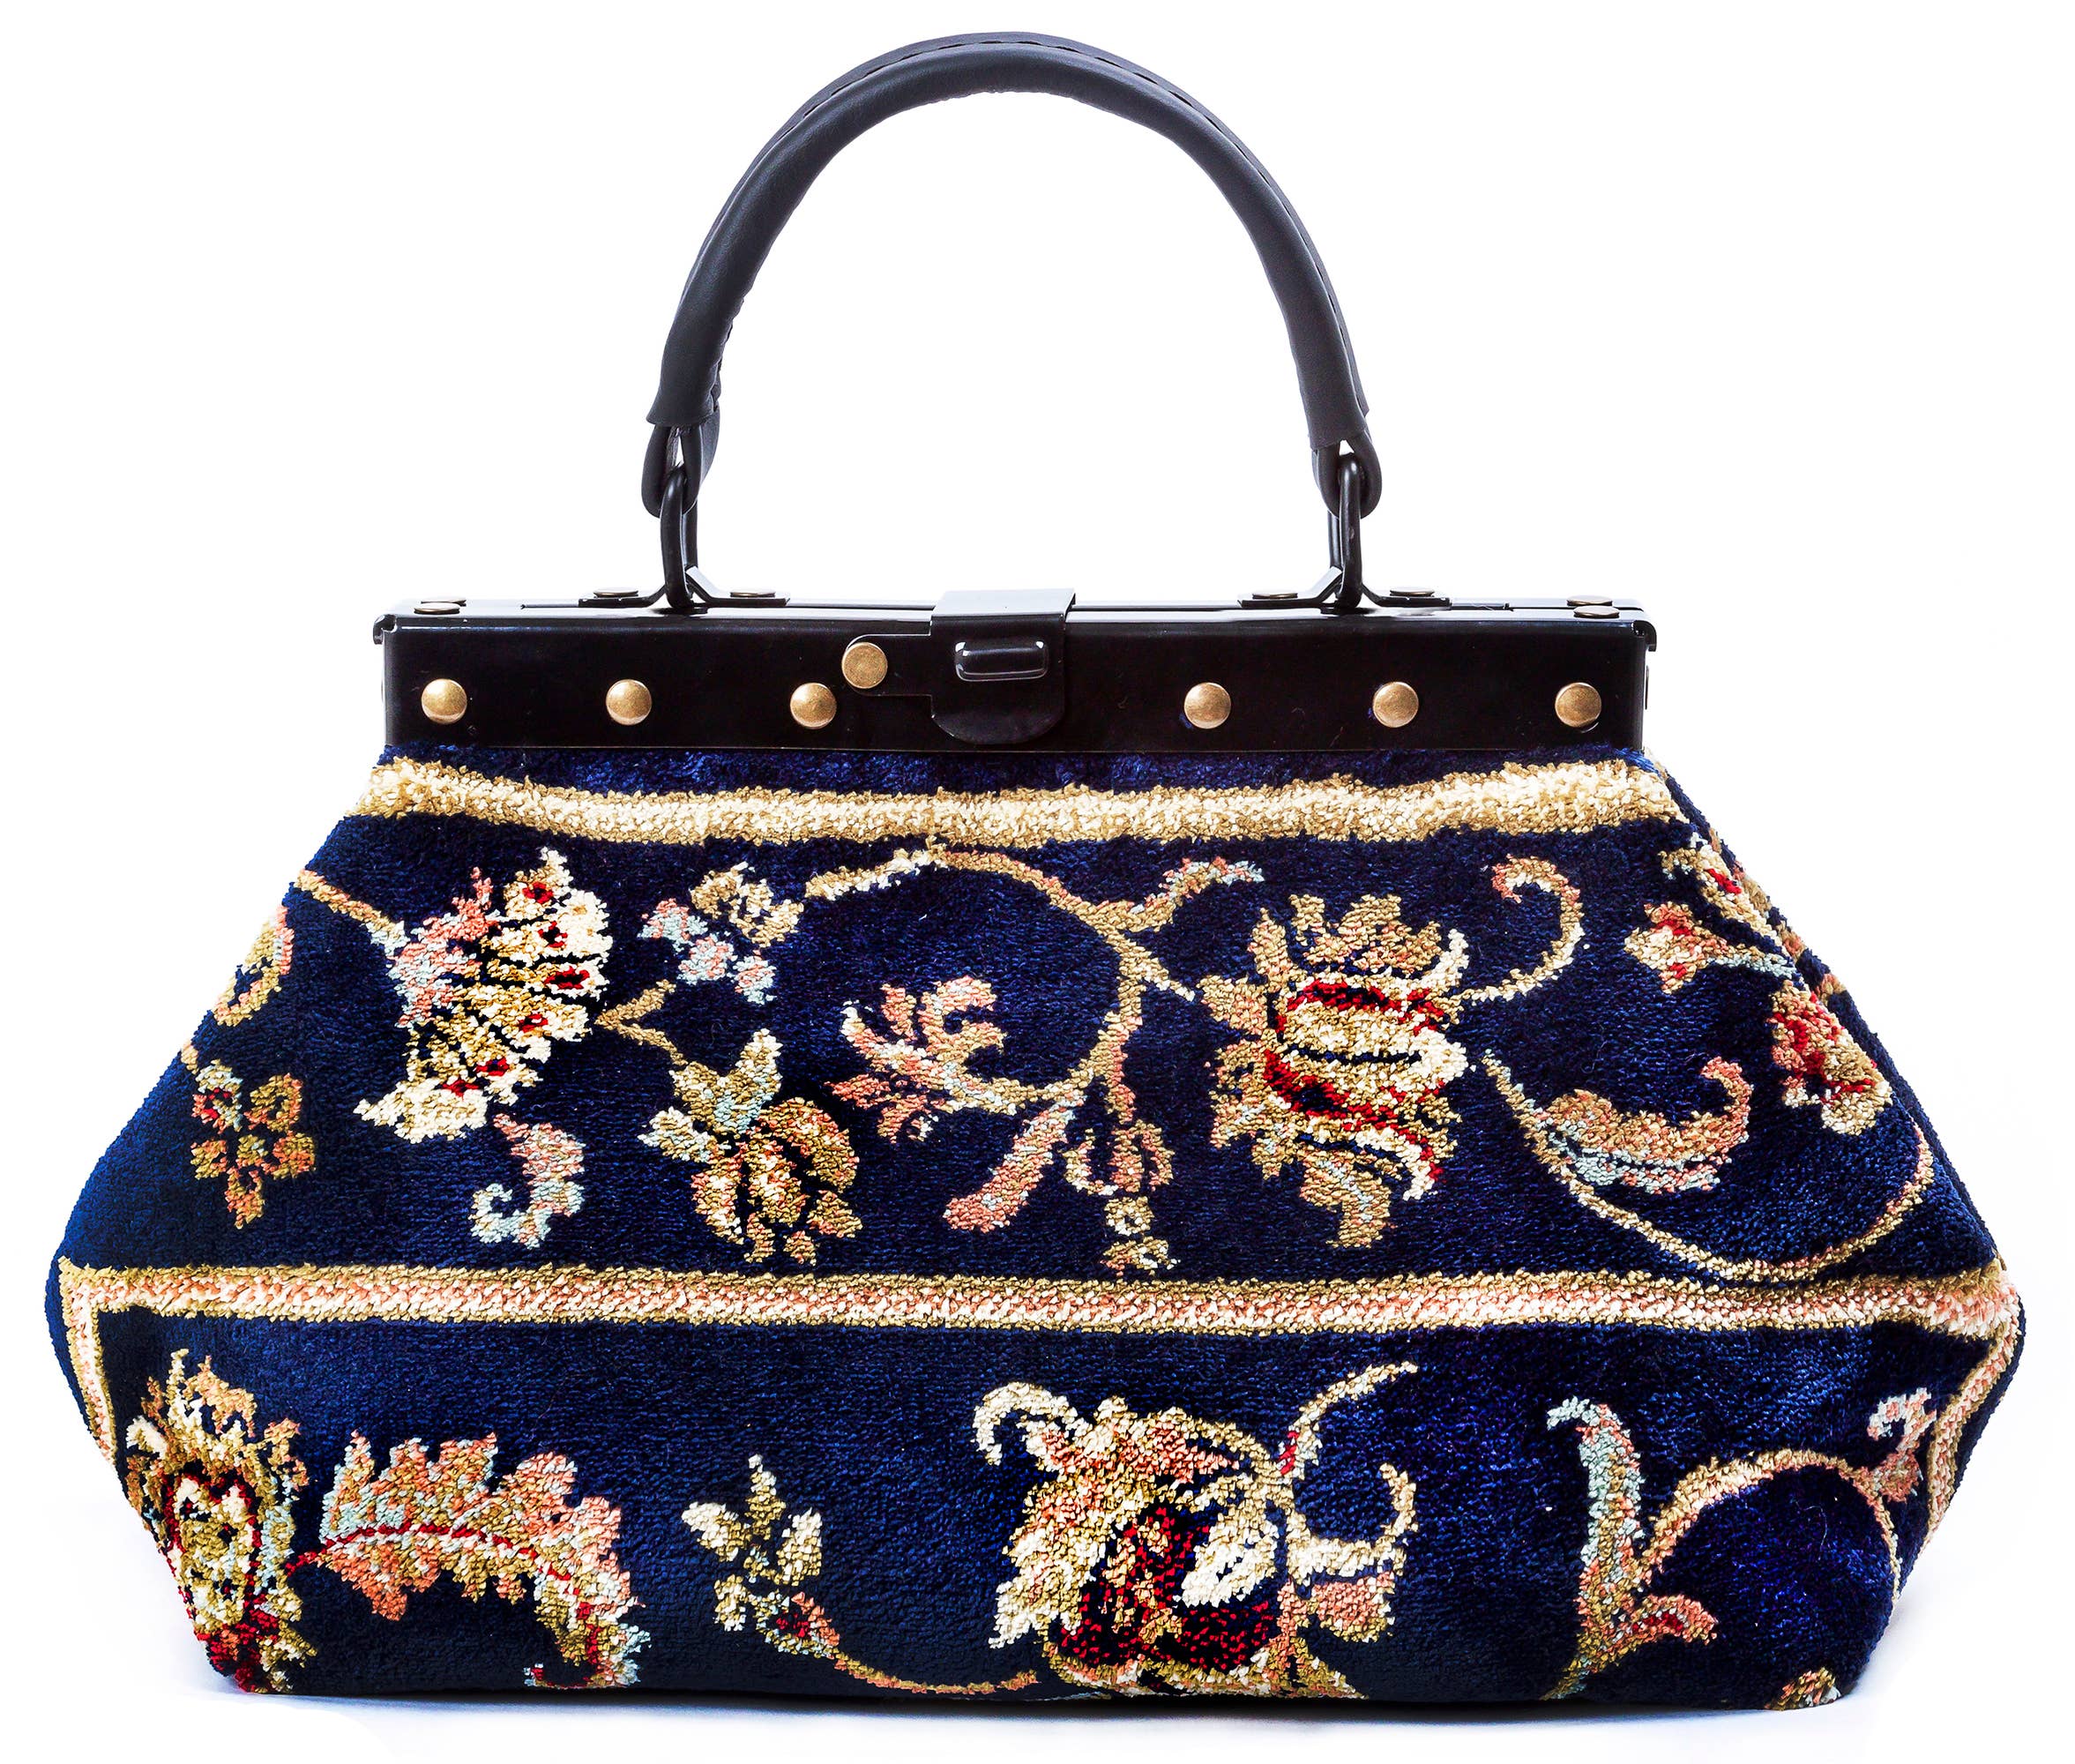 Small Carpet Bag EXQUISITE Palace Navy Magical Mary Poppins Vintage-Style Carpet Bag with leather handle. 